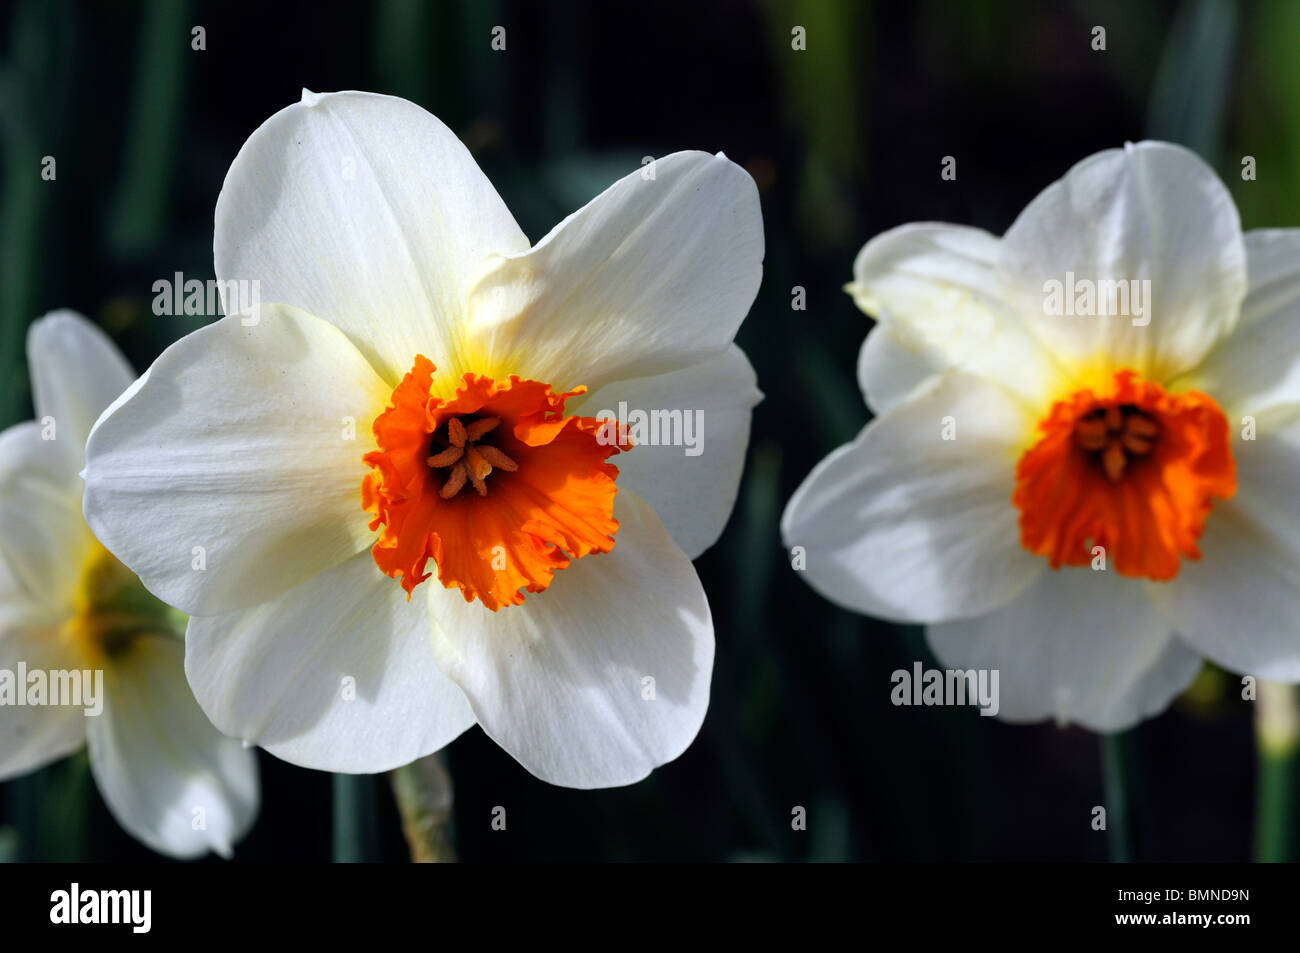 Narcissus verger division 3 Daffodil macro photo Close up flower bloom blossom white perianth red corona Stock Photo